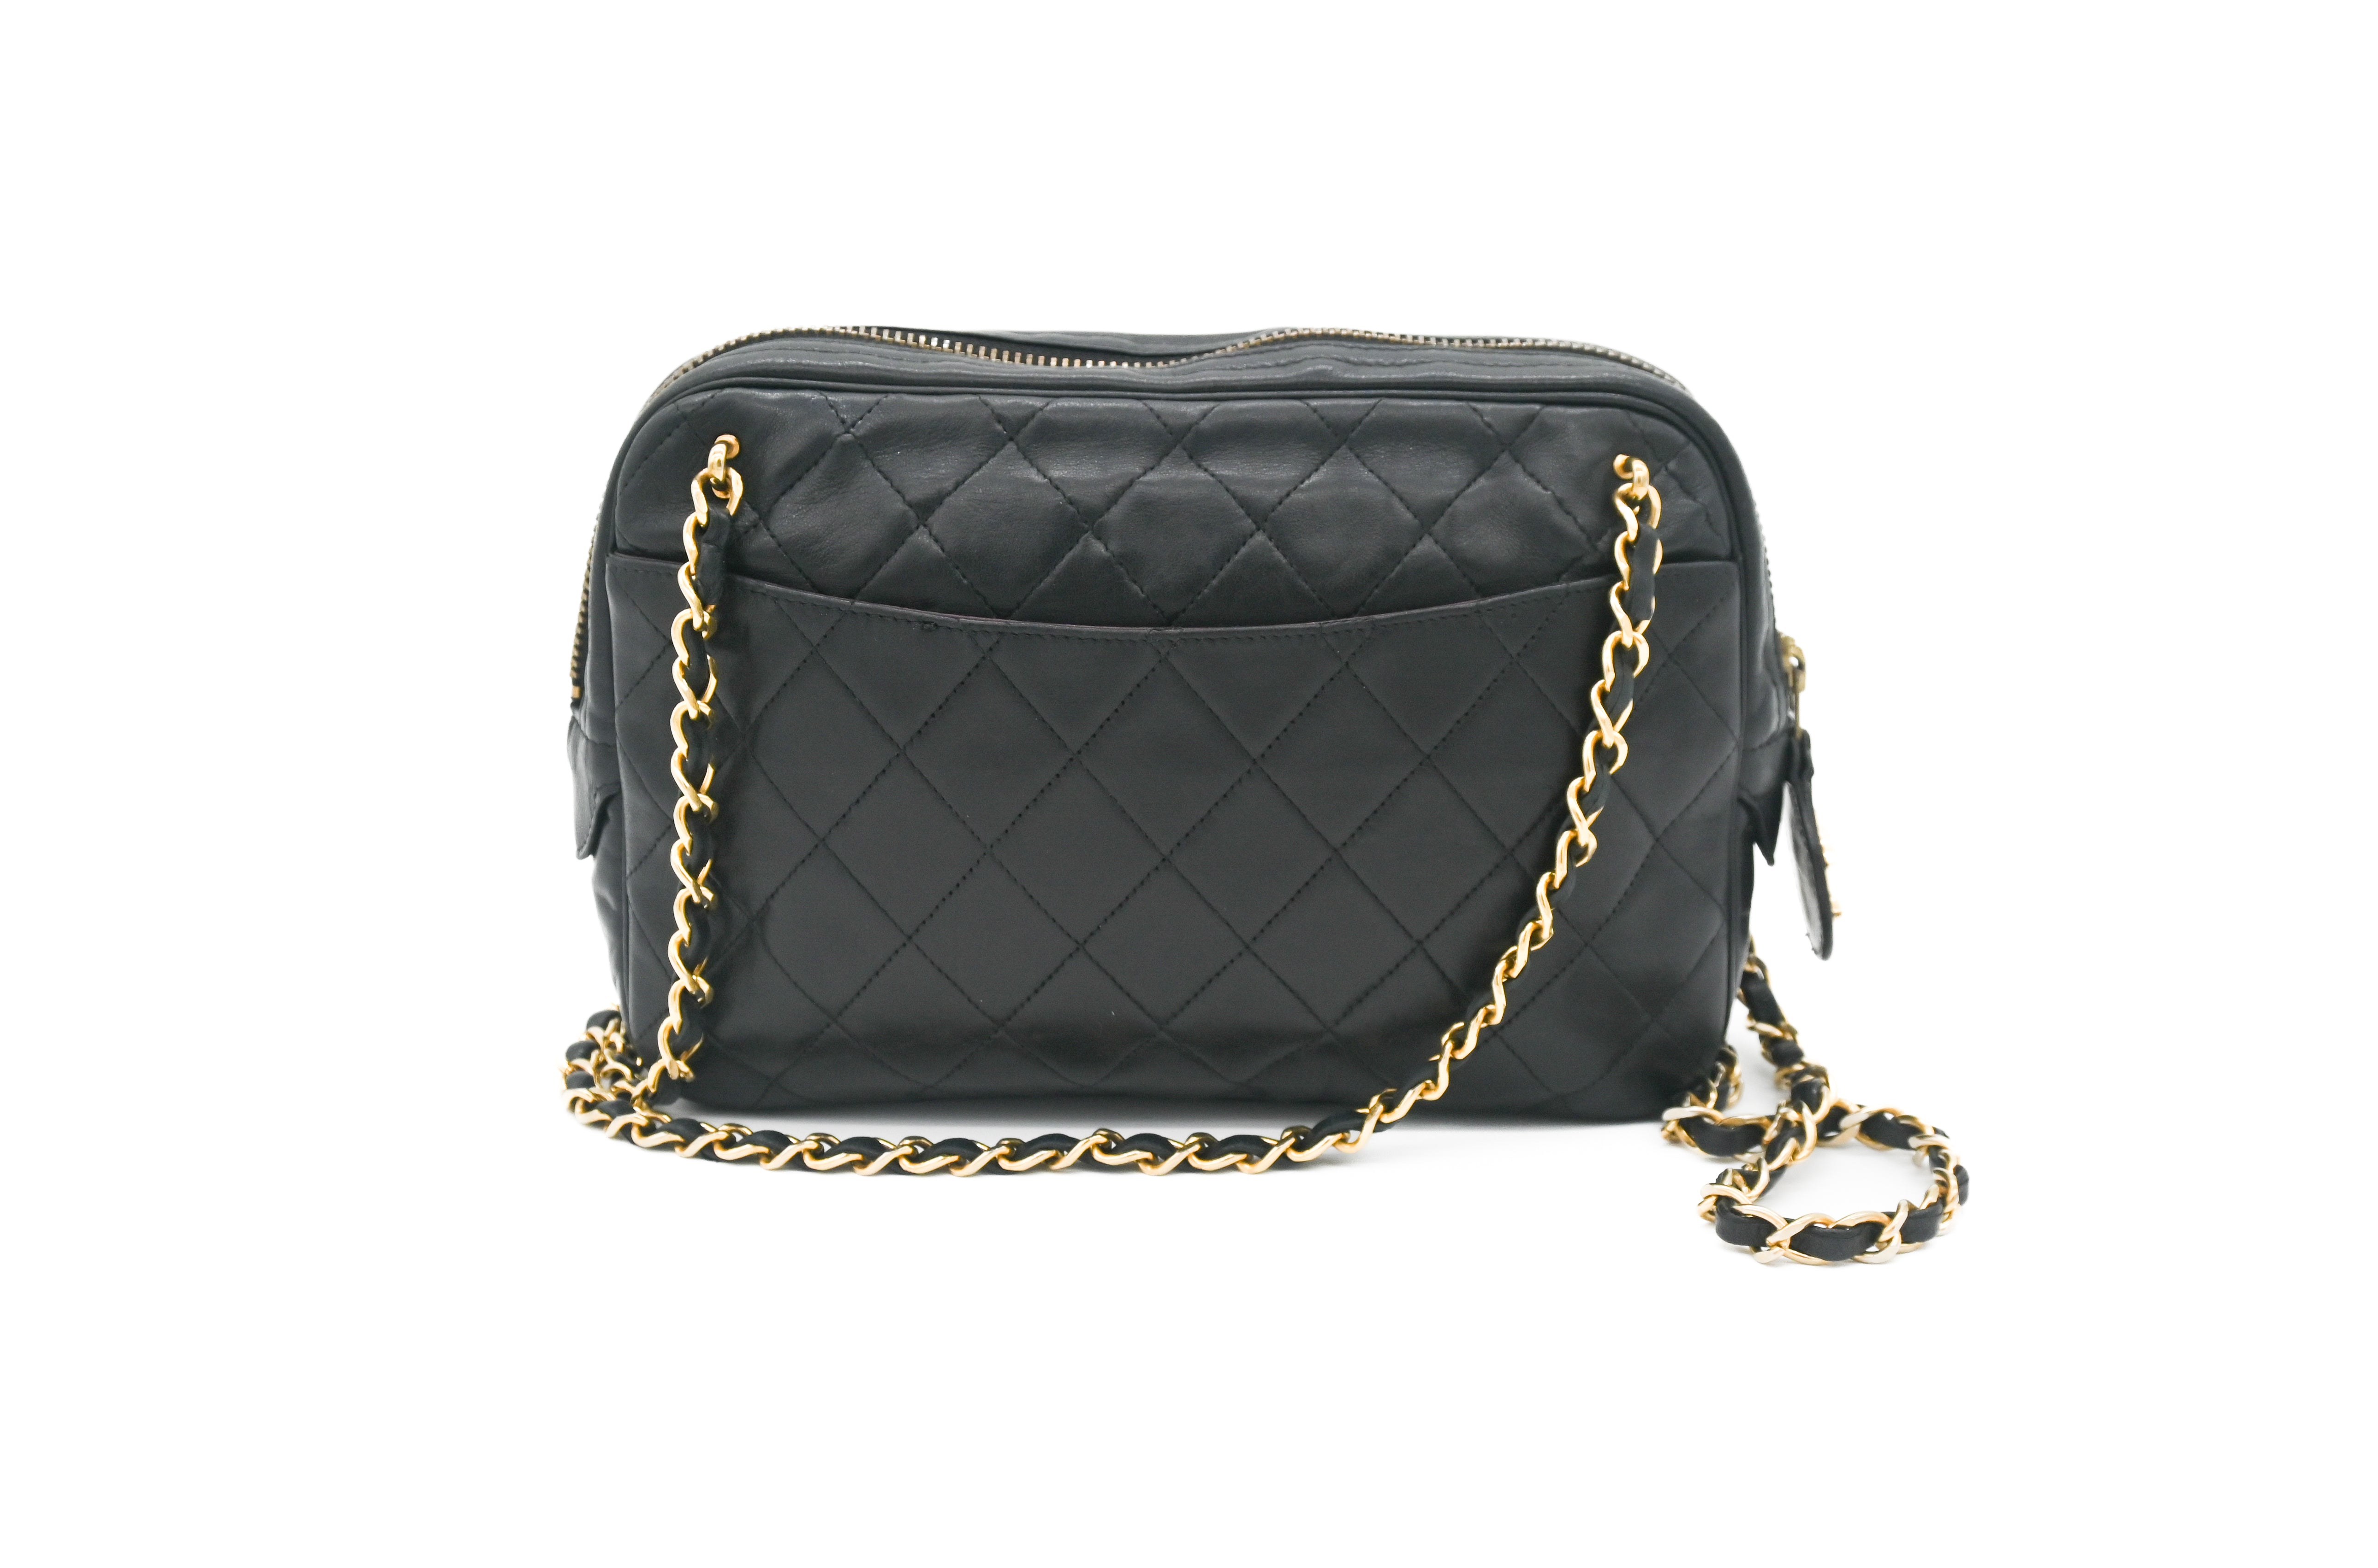 Chanel Classic Flap Camera  Only One 216248 Metallic Silver Python Skin  Leather WeekendTravel Bag  Chanel  Buy at TrueFacet